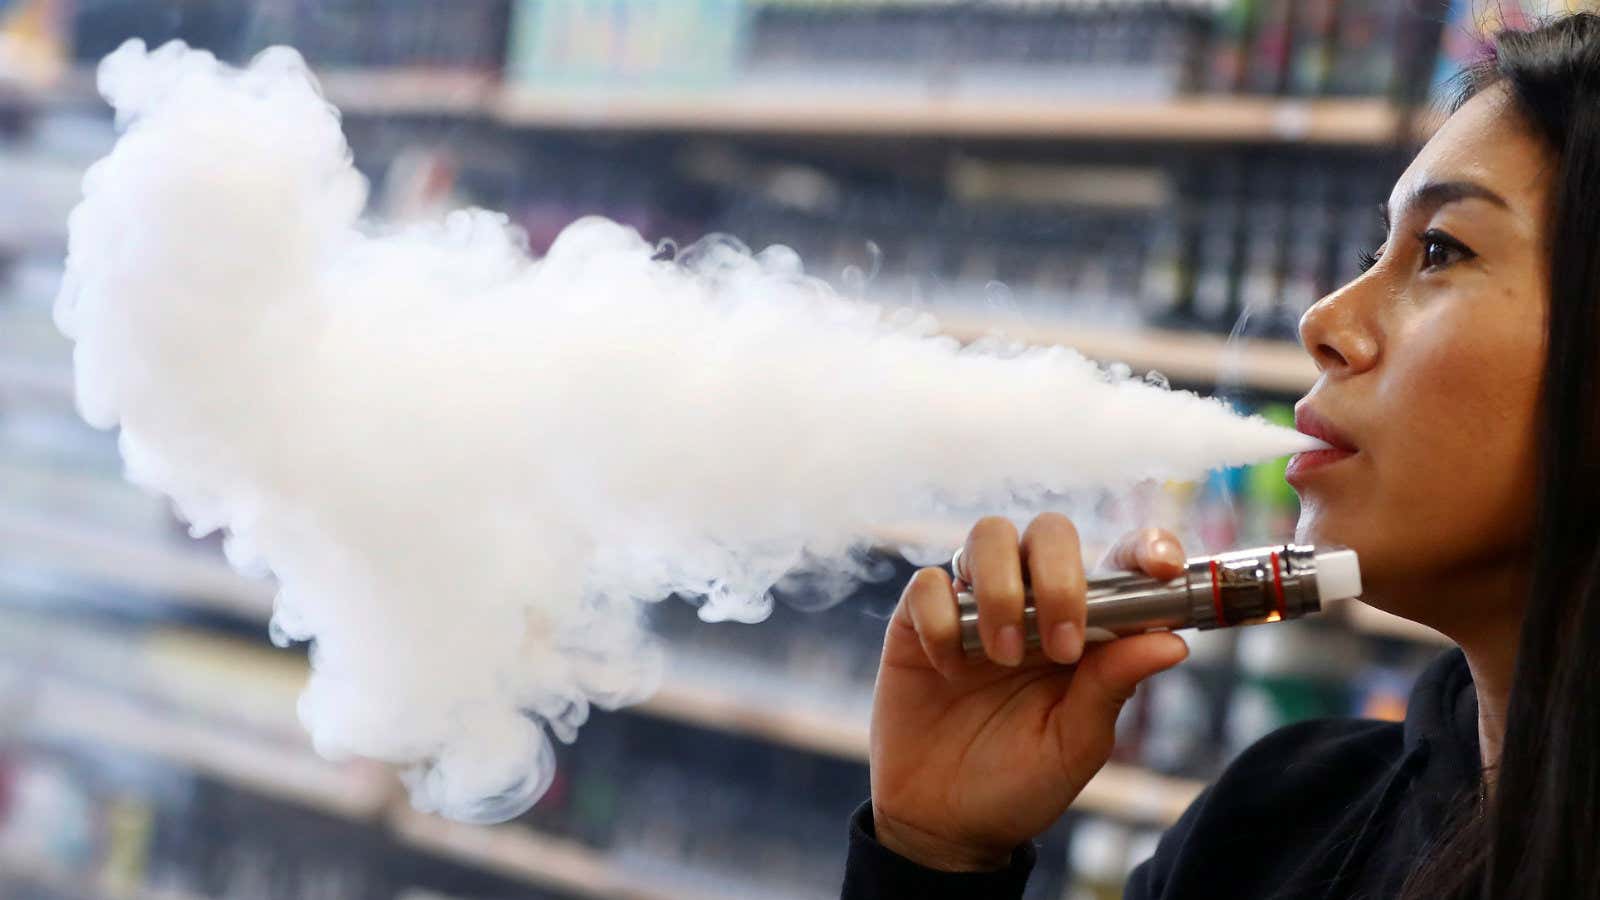 Illegal vapes with as much nicotine as 100 cigarettes sold to girl